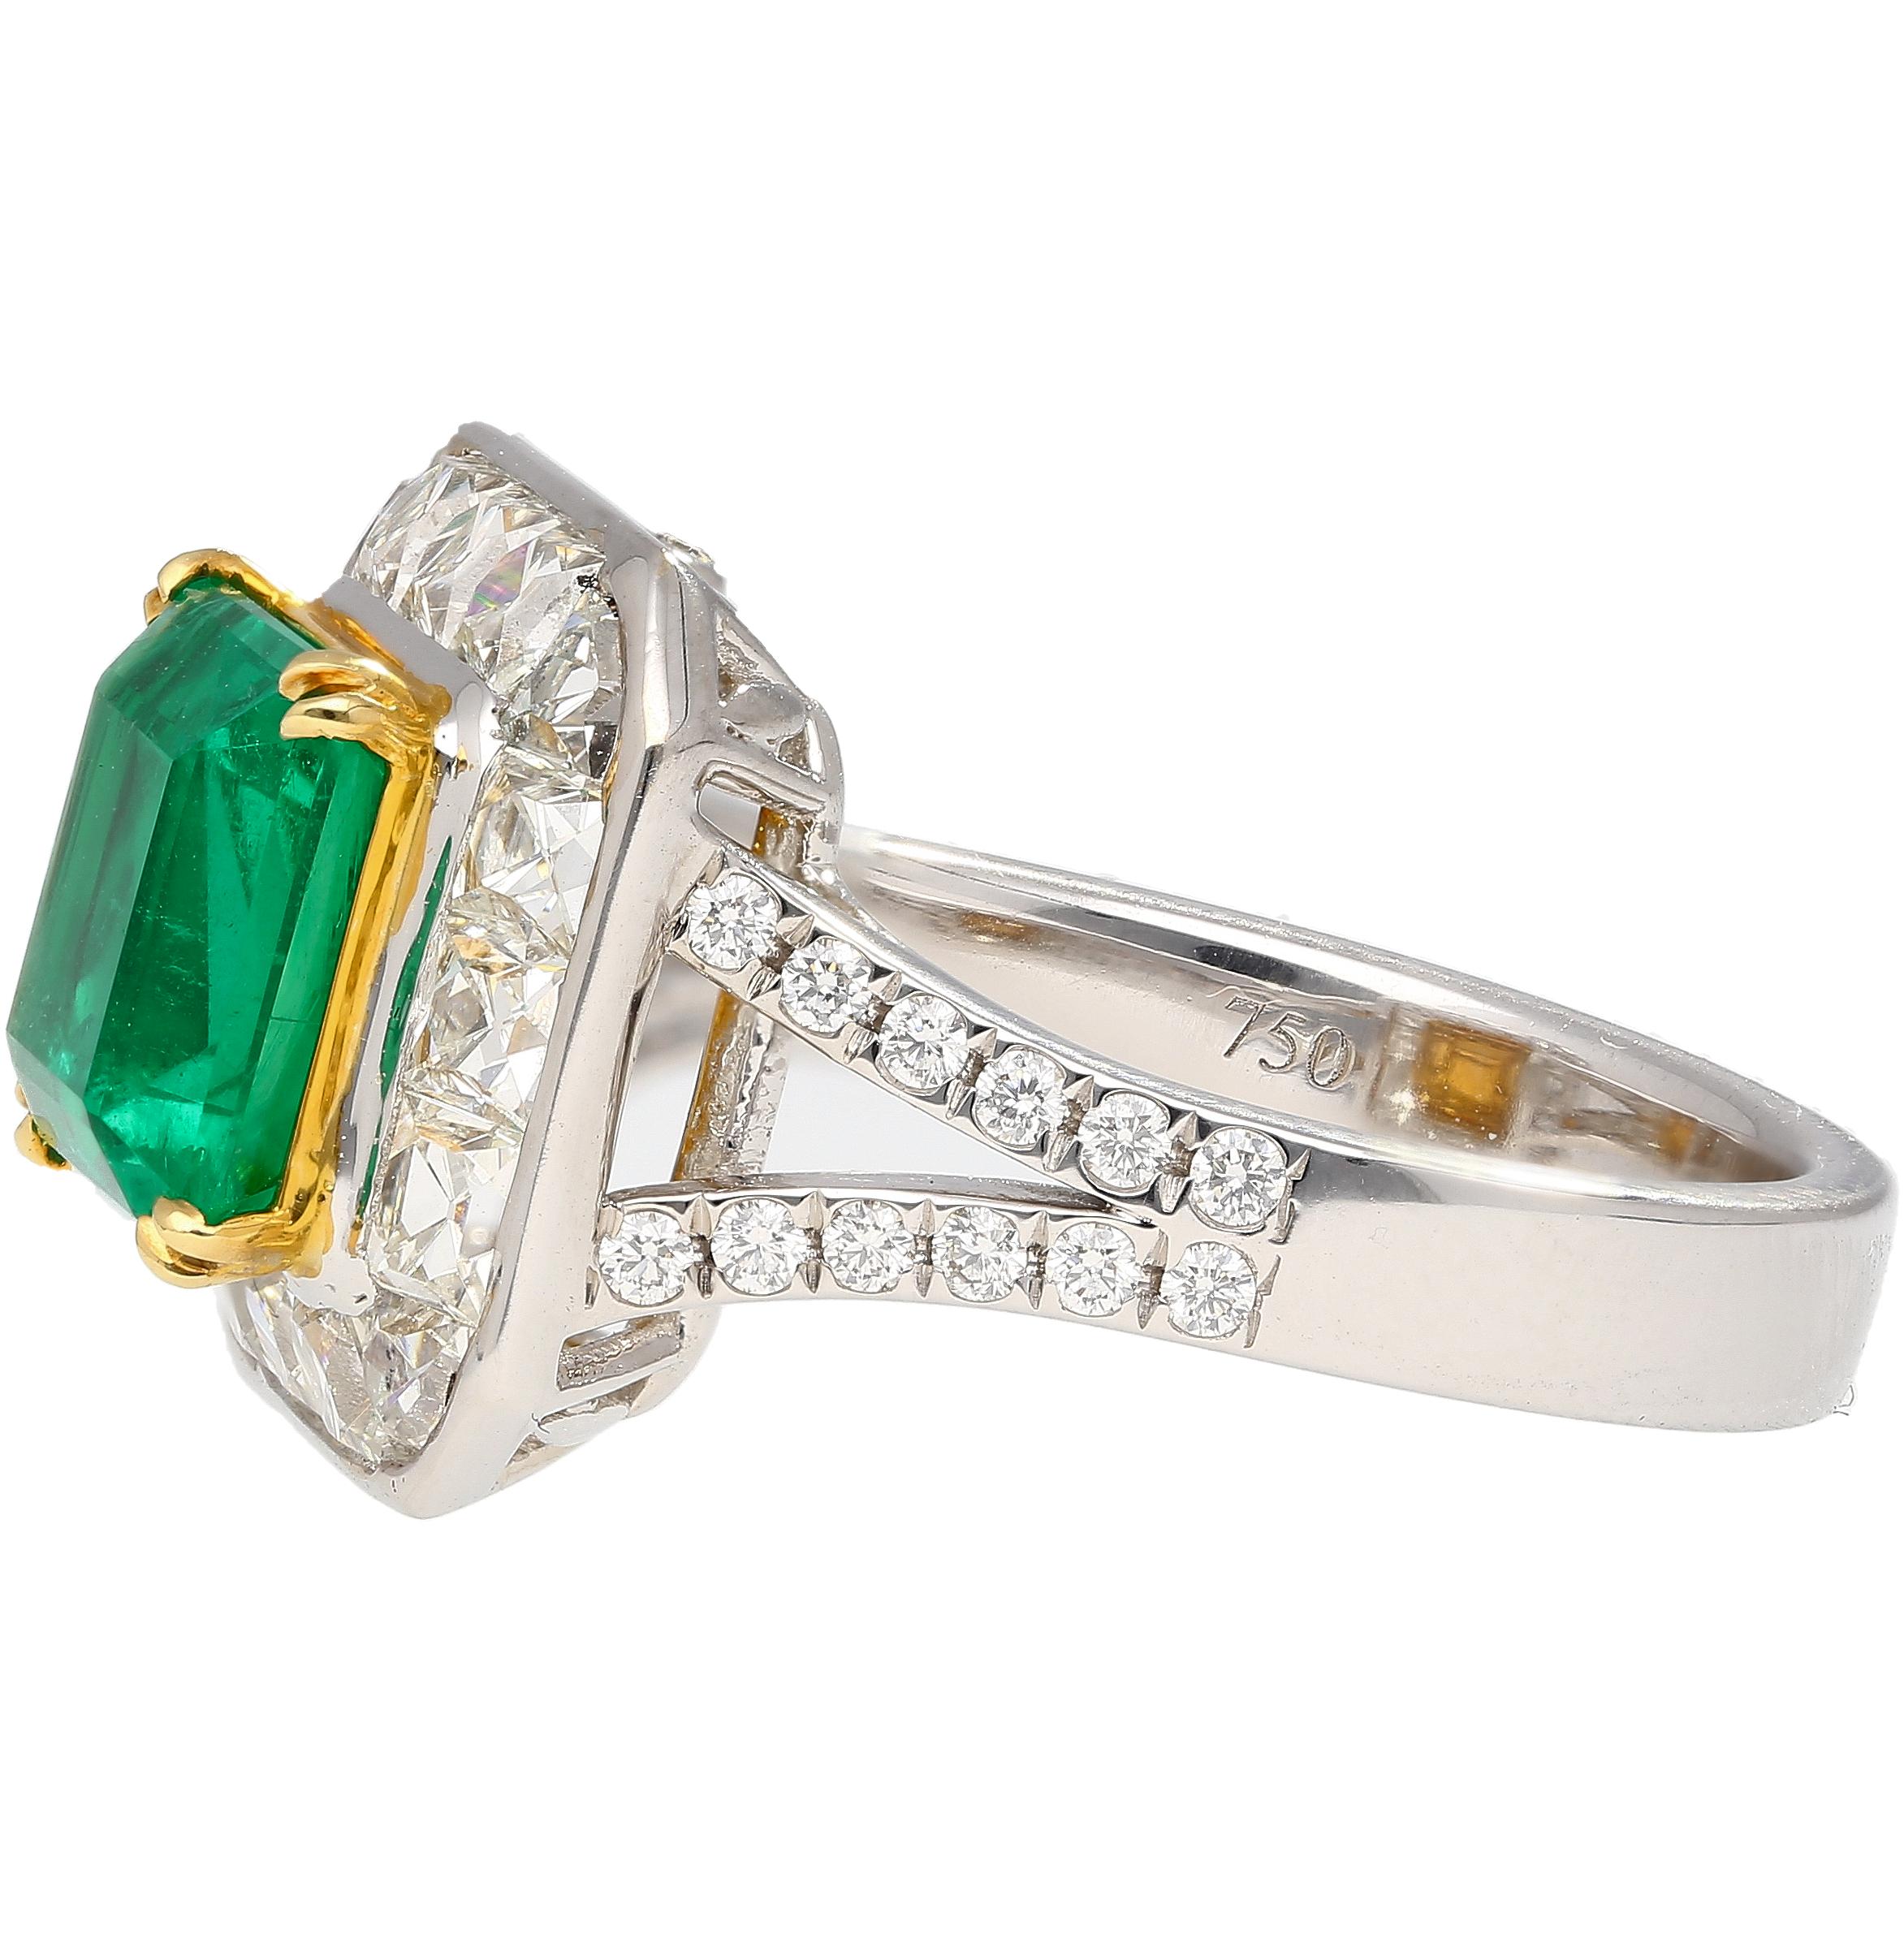 Art Deco AGL Certified No Oil 2.54 Carat Colombian Emerald & Old French Cut Diamond Ring For Sale